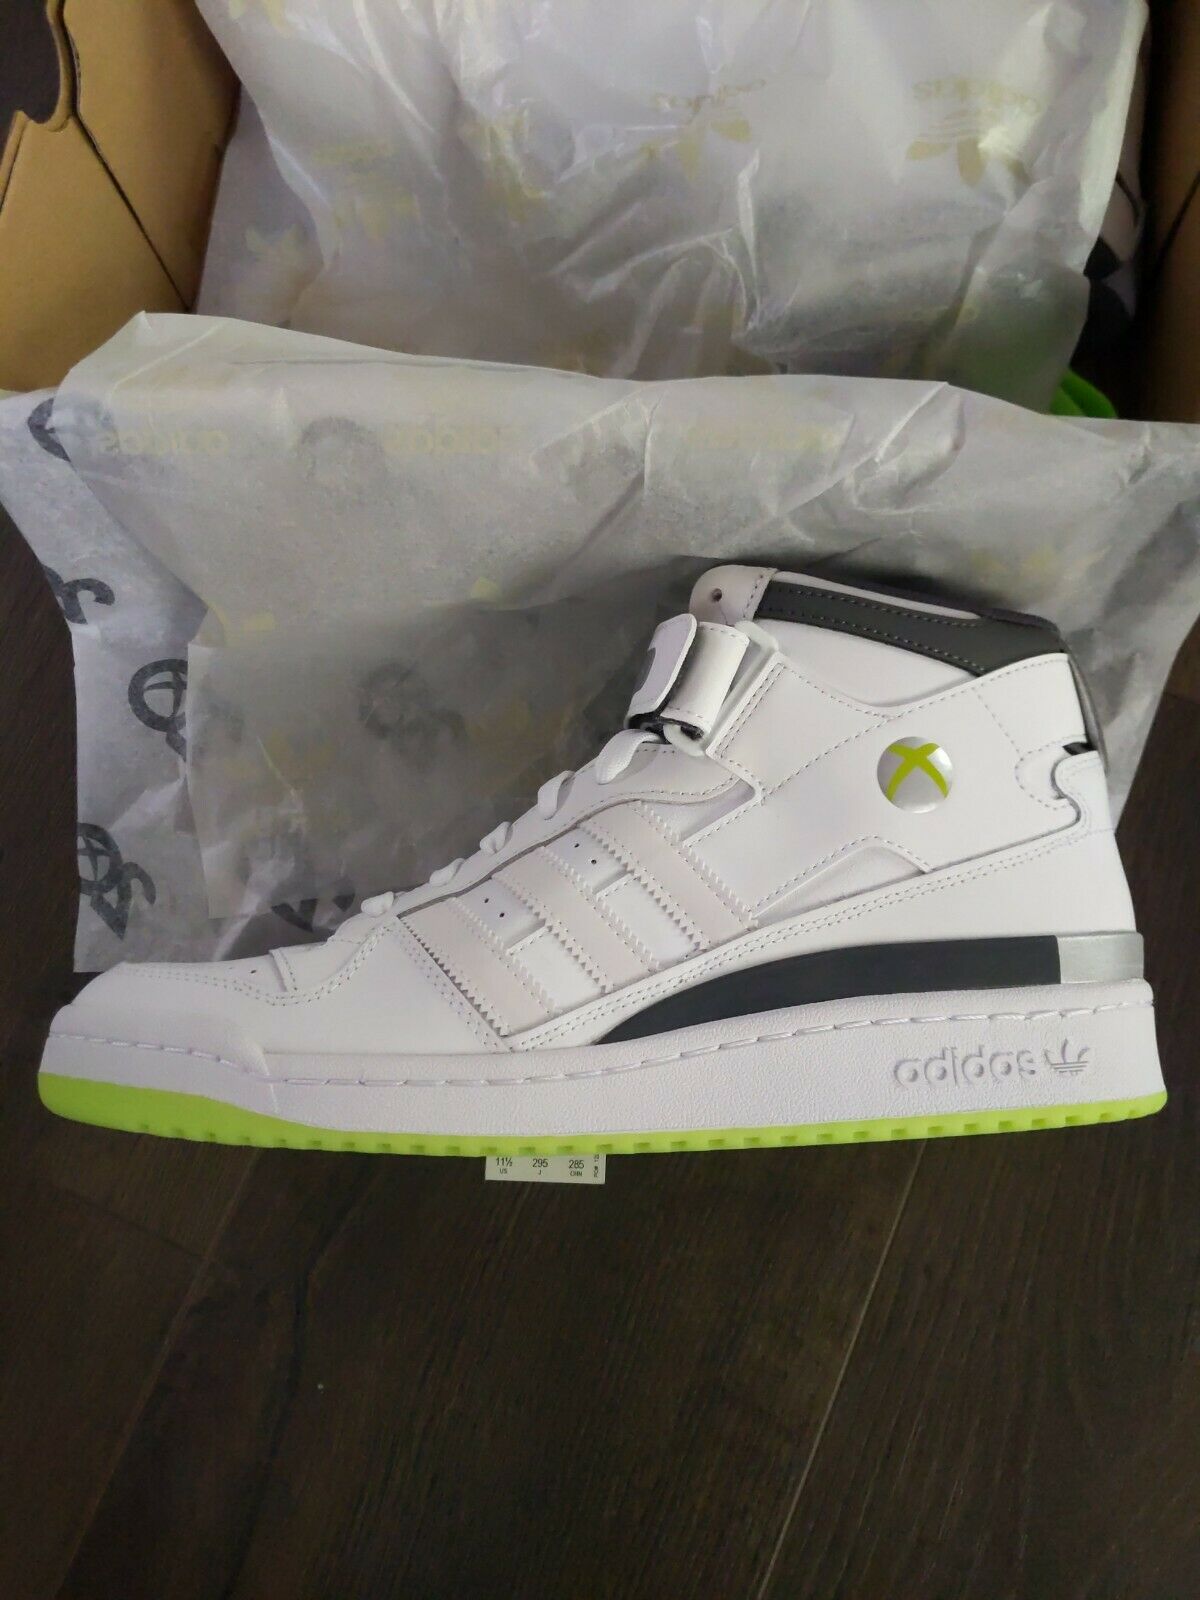 New Adidas XBox 360 Forum Mid Shoes Cloud White/Grey Sz 11.5. in hand.